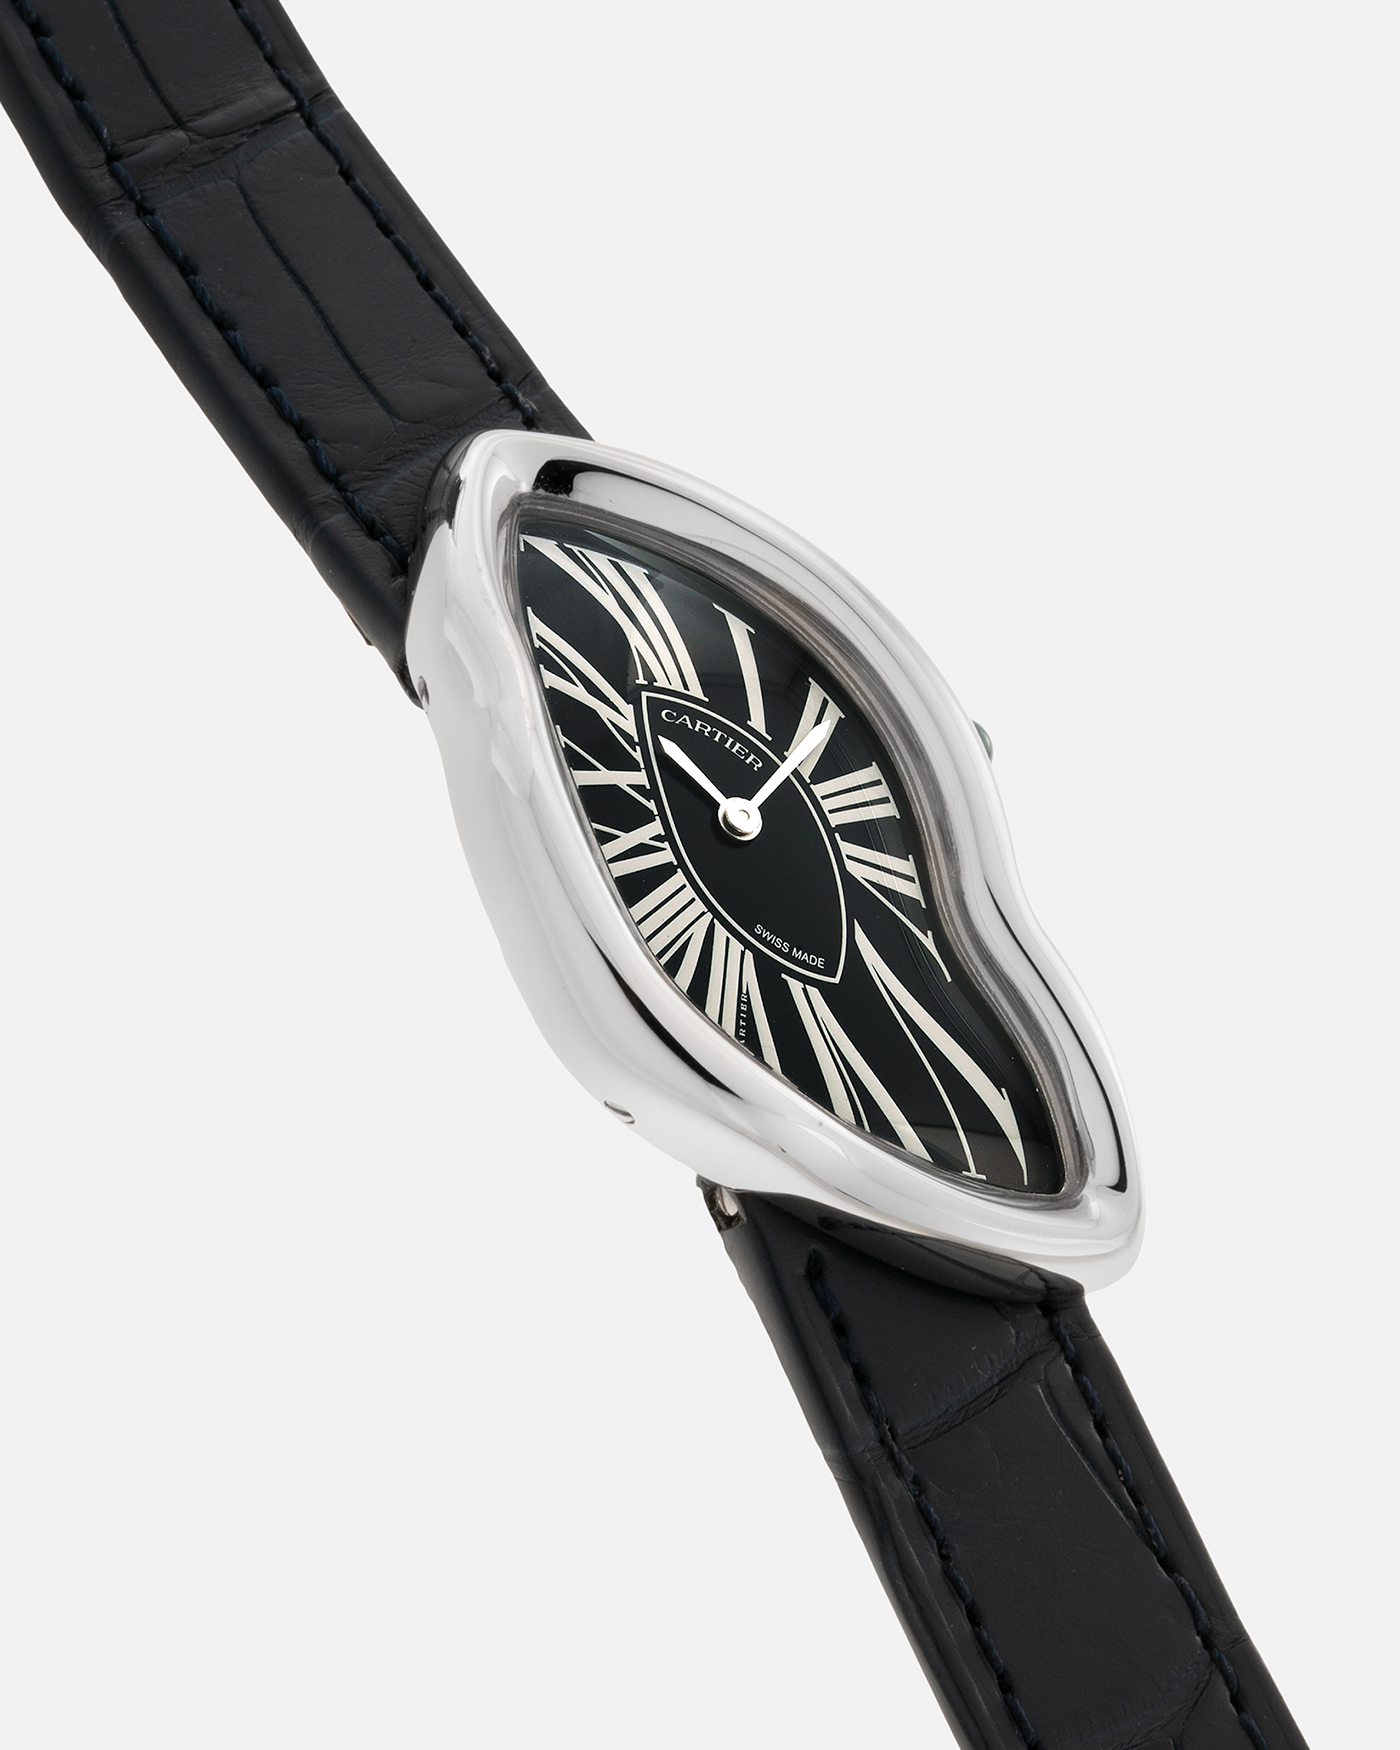 Brand: Cartier Year: 2023 Model: Crash Reference Number: WGCH0080, New Special Order Material: 18-carat White Gold (Rhodium Plated) Movement: Cartier Cal. 1917 MC, Manual-Winding Case Dimensions: 42mm x 24mm (Asymmetrical Case) Strap: Cartier Black Alligator Strap with Signed 18-carat White Gold ‘Crash’ Deployant Buckle